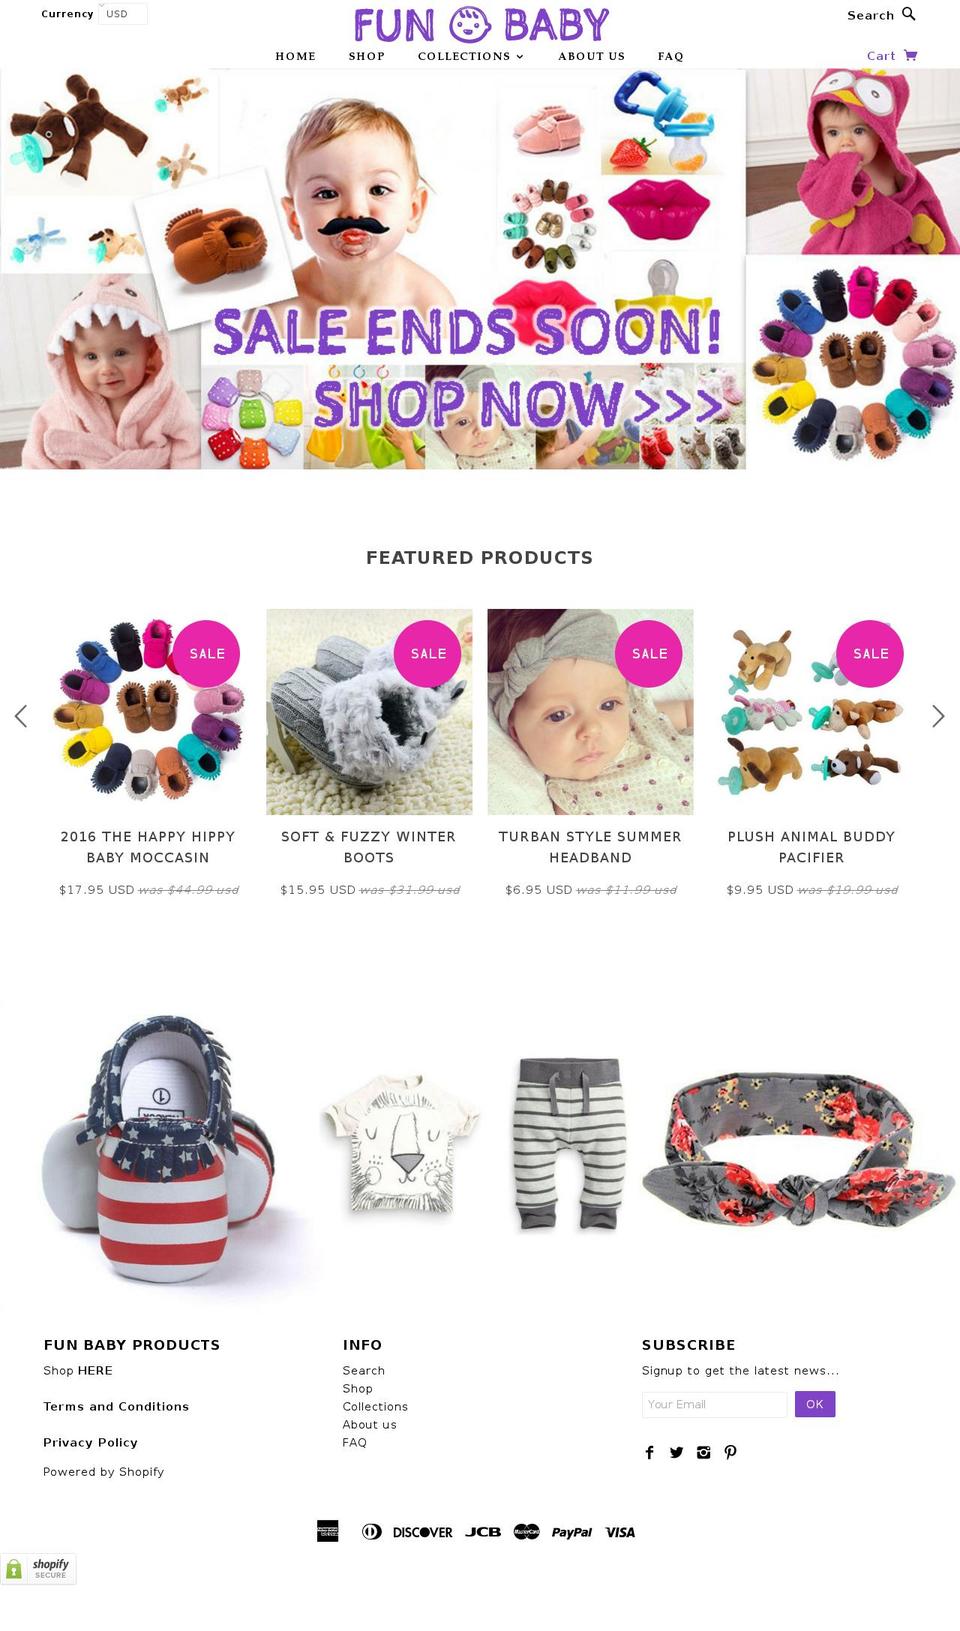 Blockshop Shopify theme site example funbabyproducts.com